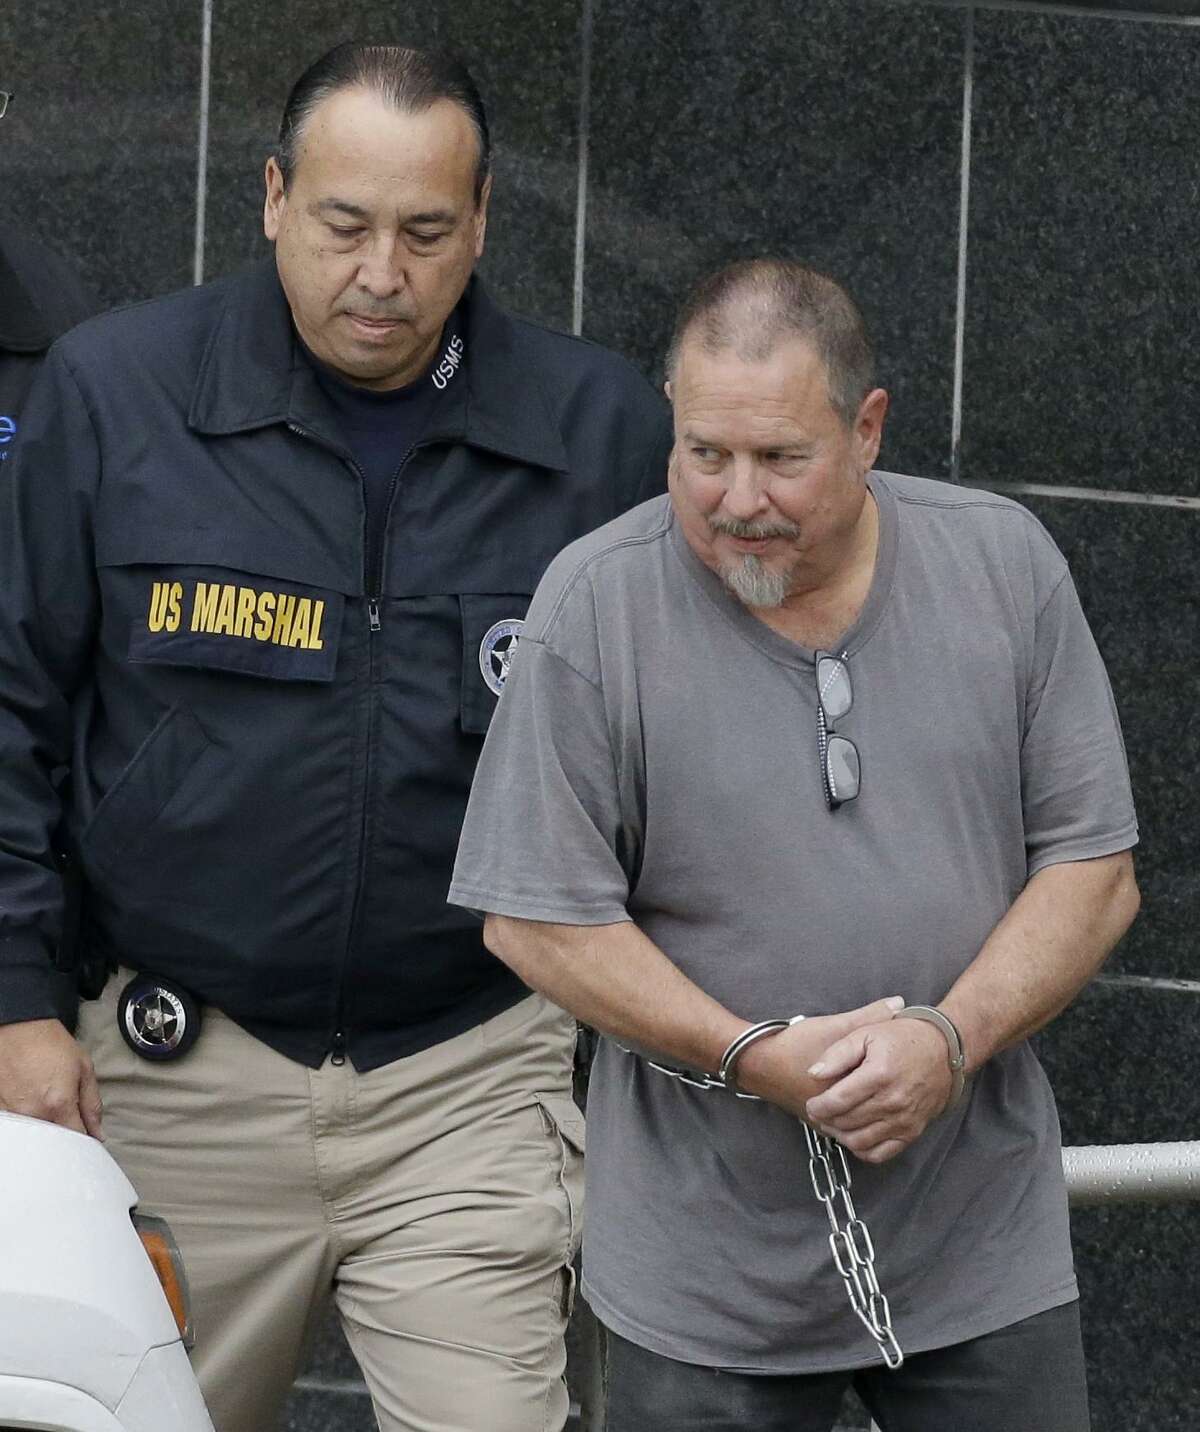 An indictment naming former Bandidos President Jeff Pike and others contends that the motorcycle club is engaged in murder, robbery and drug trafficking, among other crimes.